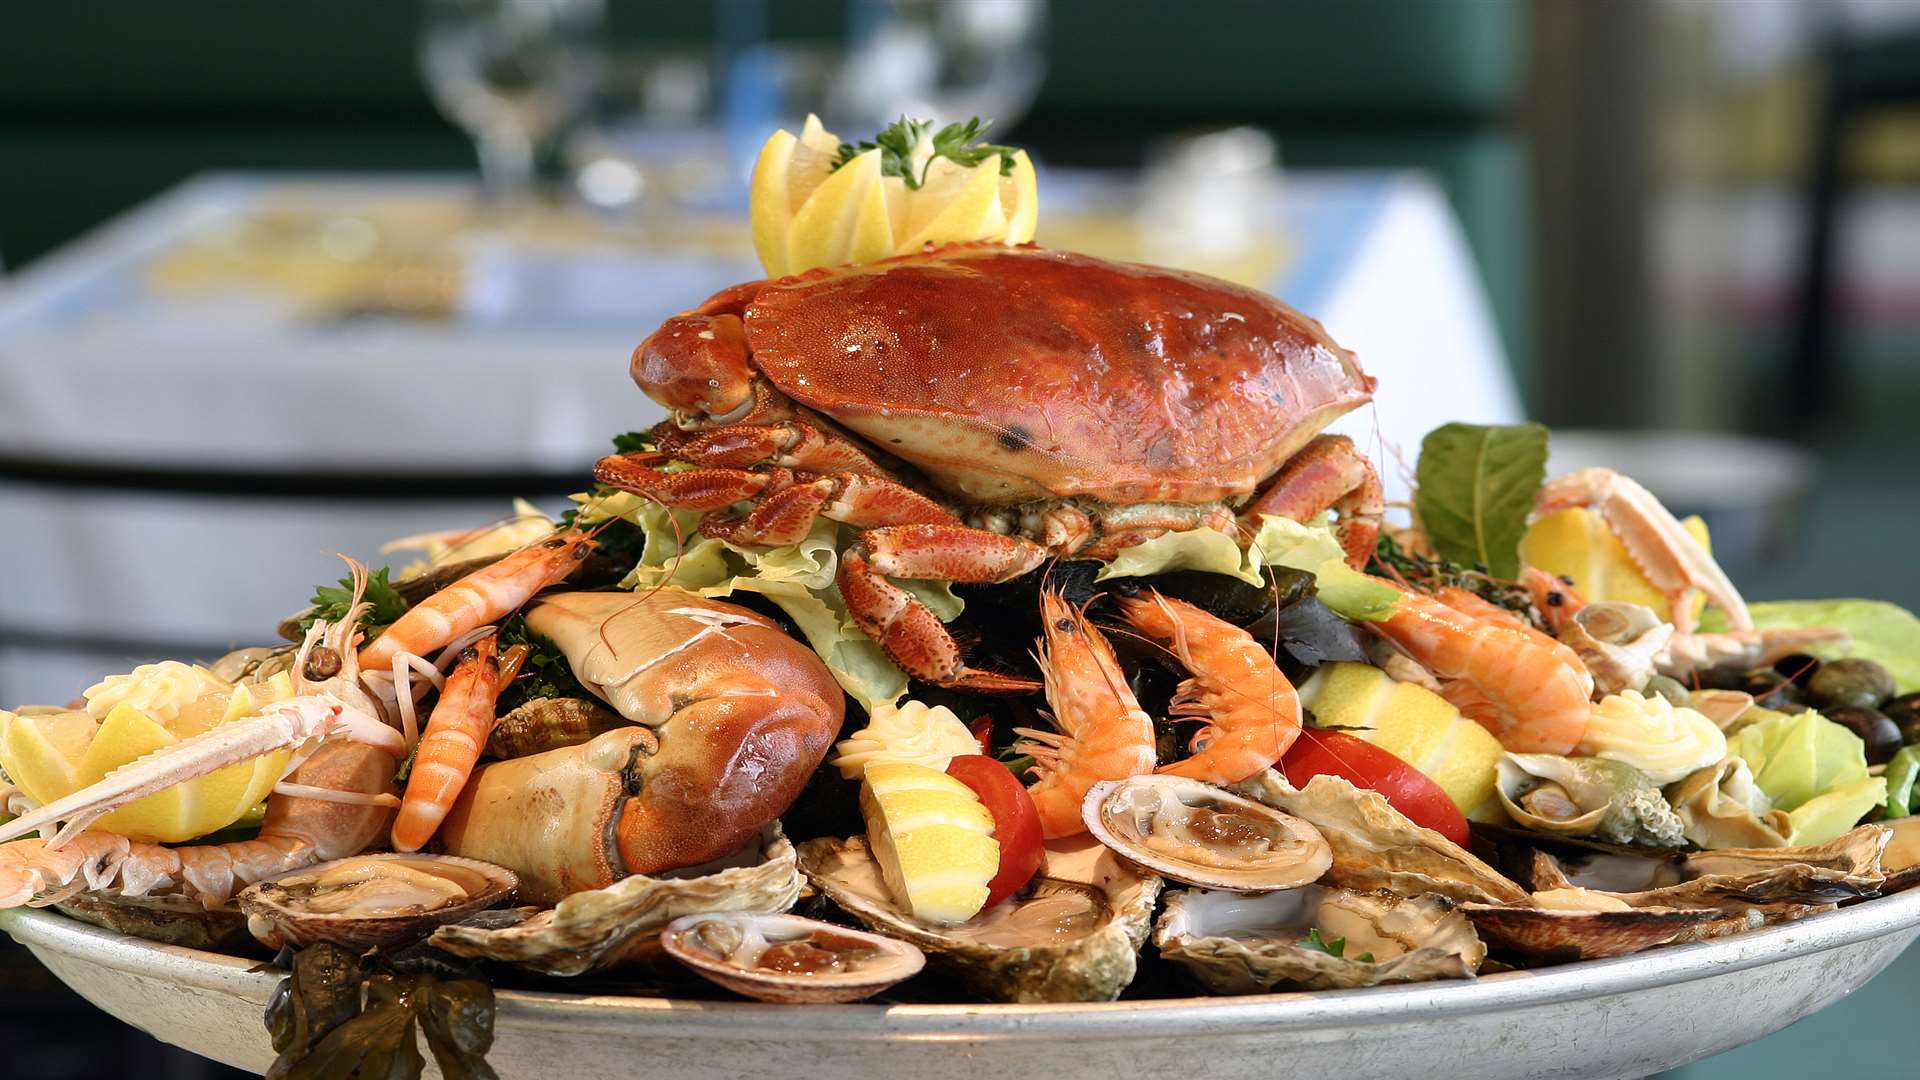 With fishing boats operating all along the Calais coast, fresh seafood is not to be missed